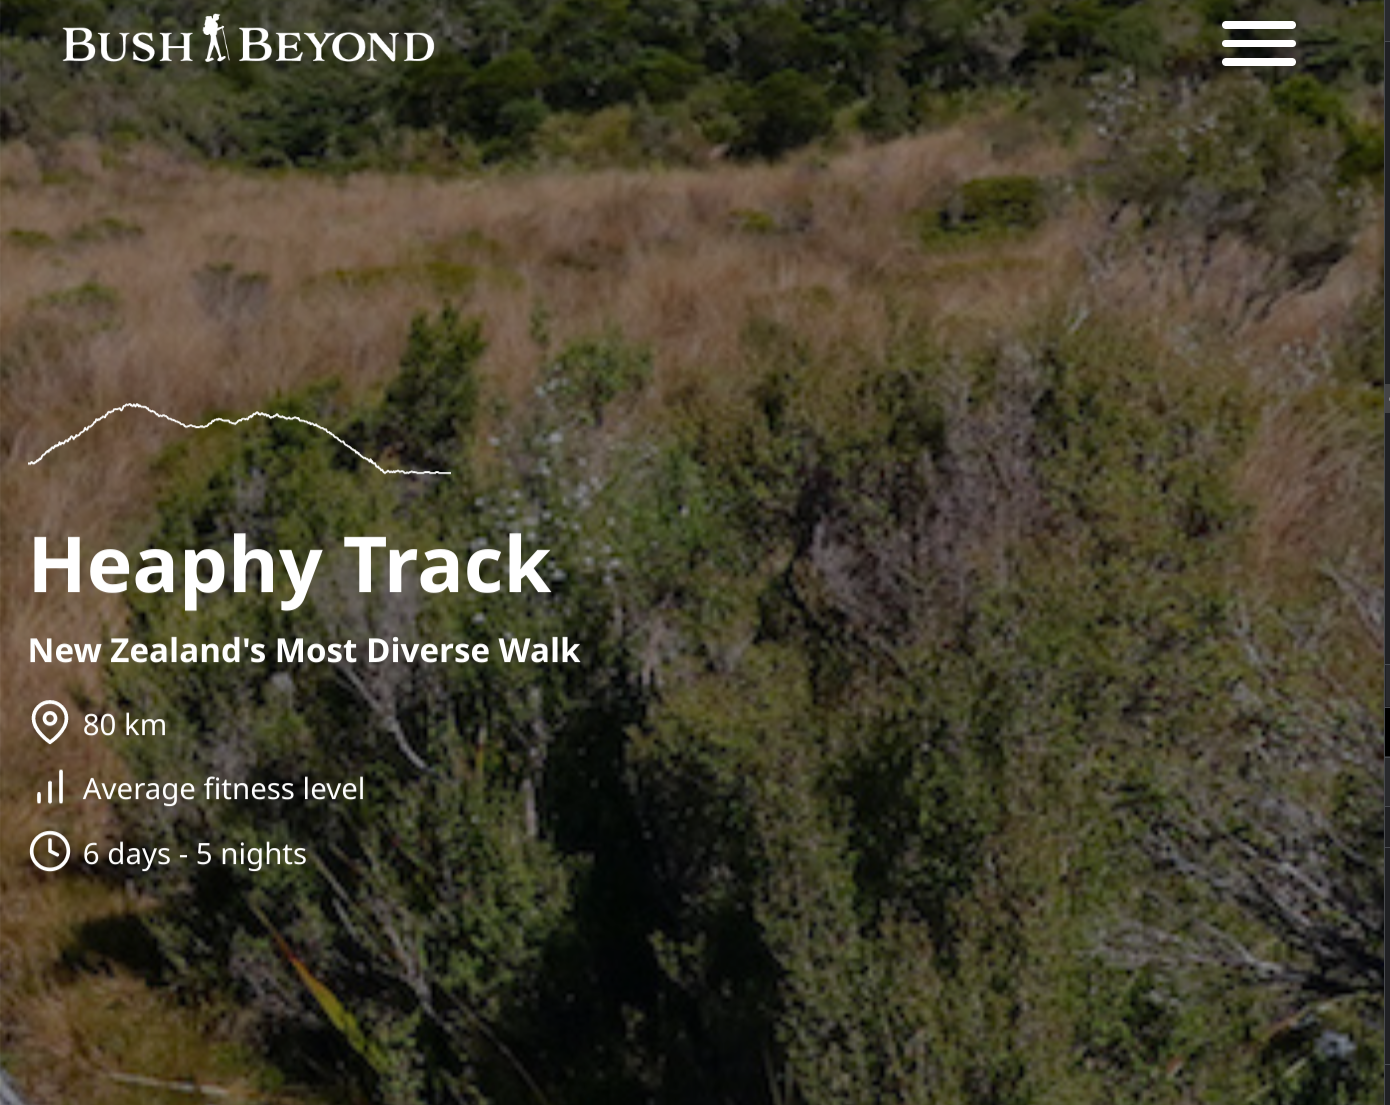 Bush and Beyond Heaphy Track Guided Walk